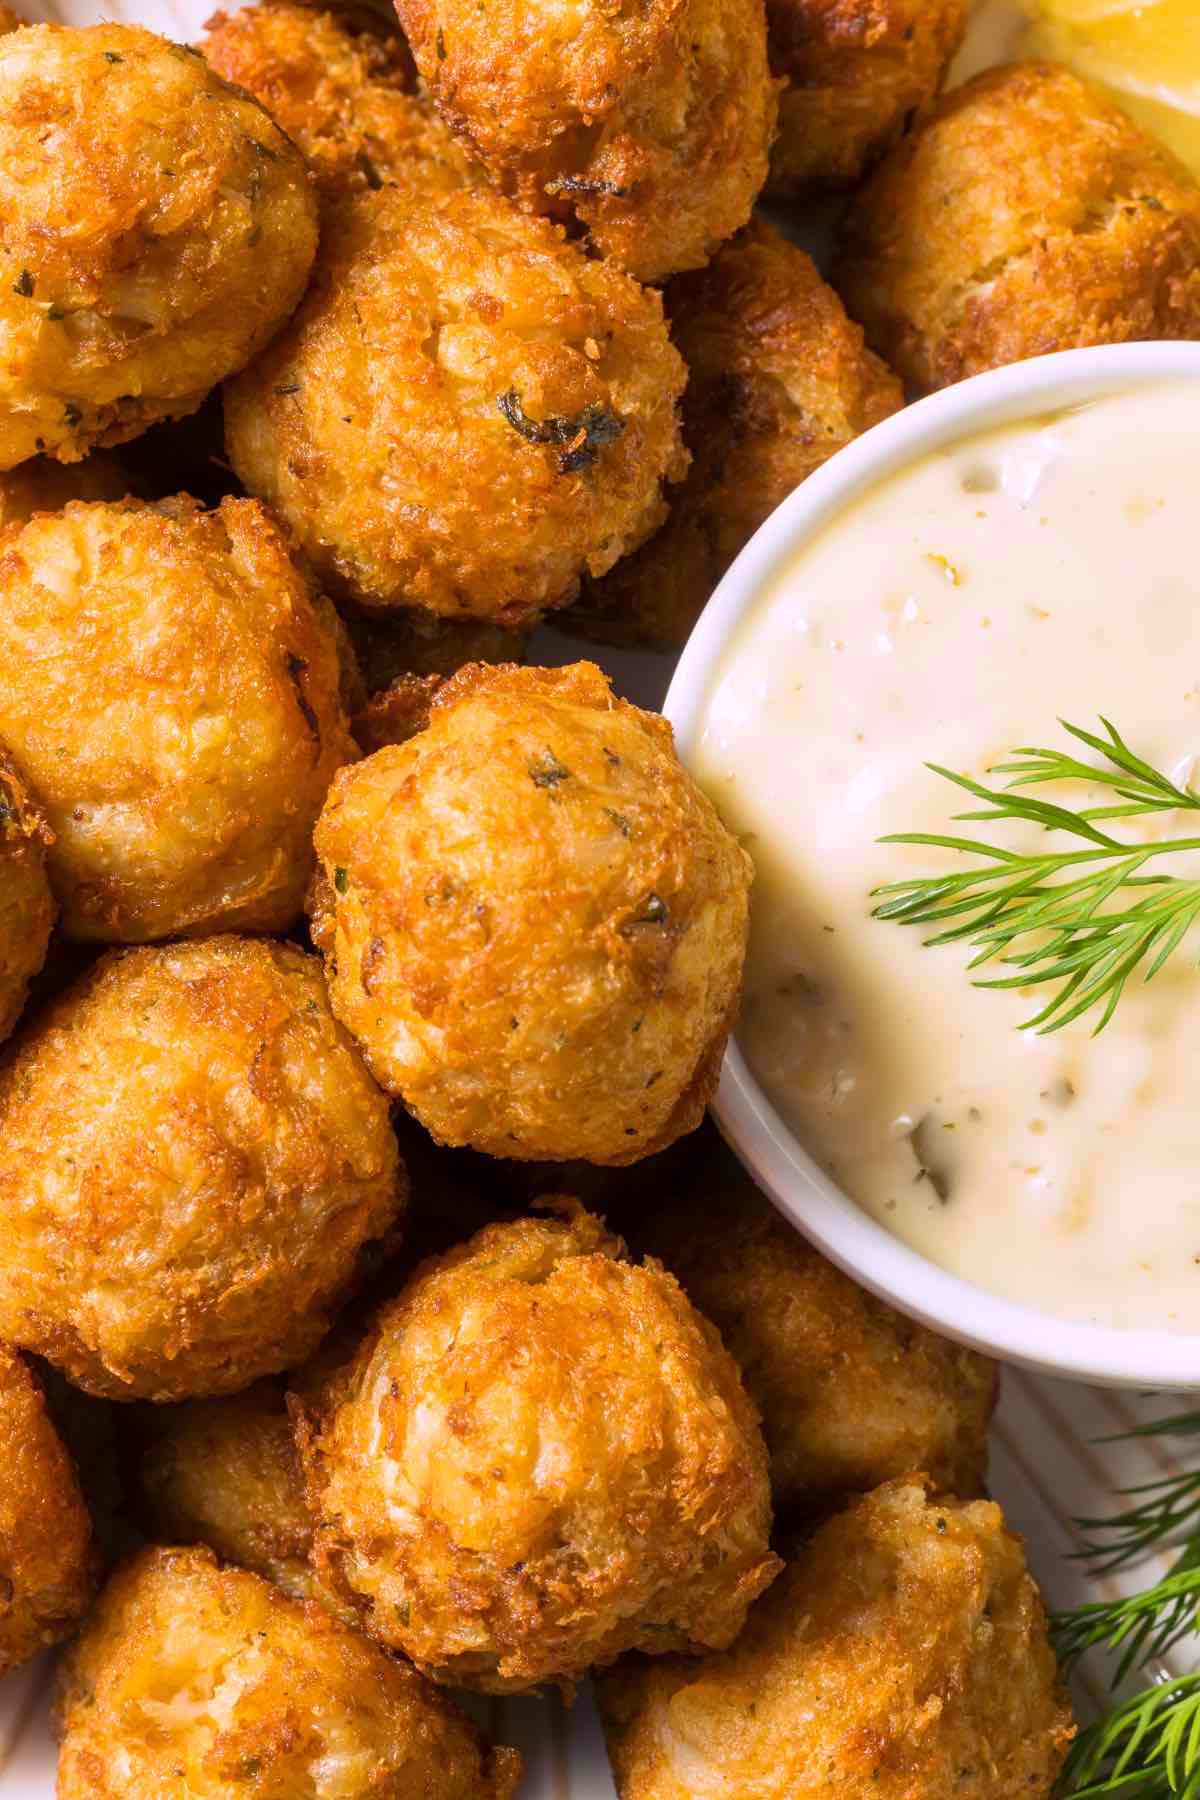 Homemade baked Crab Balls are delicious mini crab cake bites made with high-quality crab meat. This recipe is easy to prepare and makes tasty hors d'oeuvres or can be used as protein in a salad or wrap.